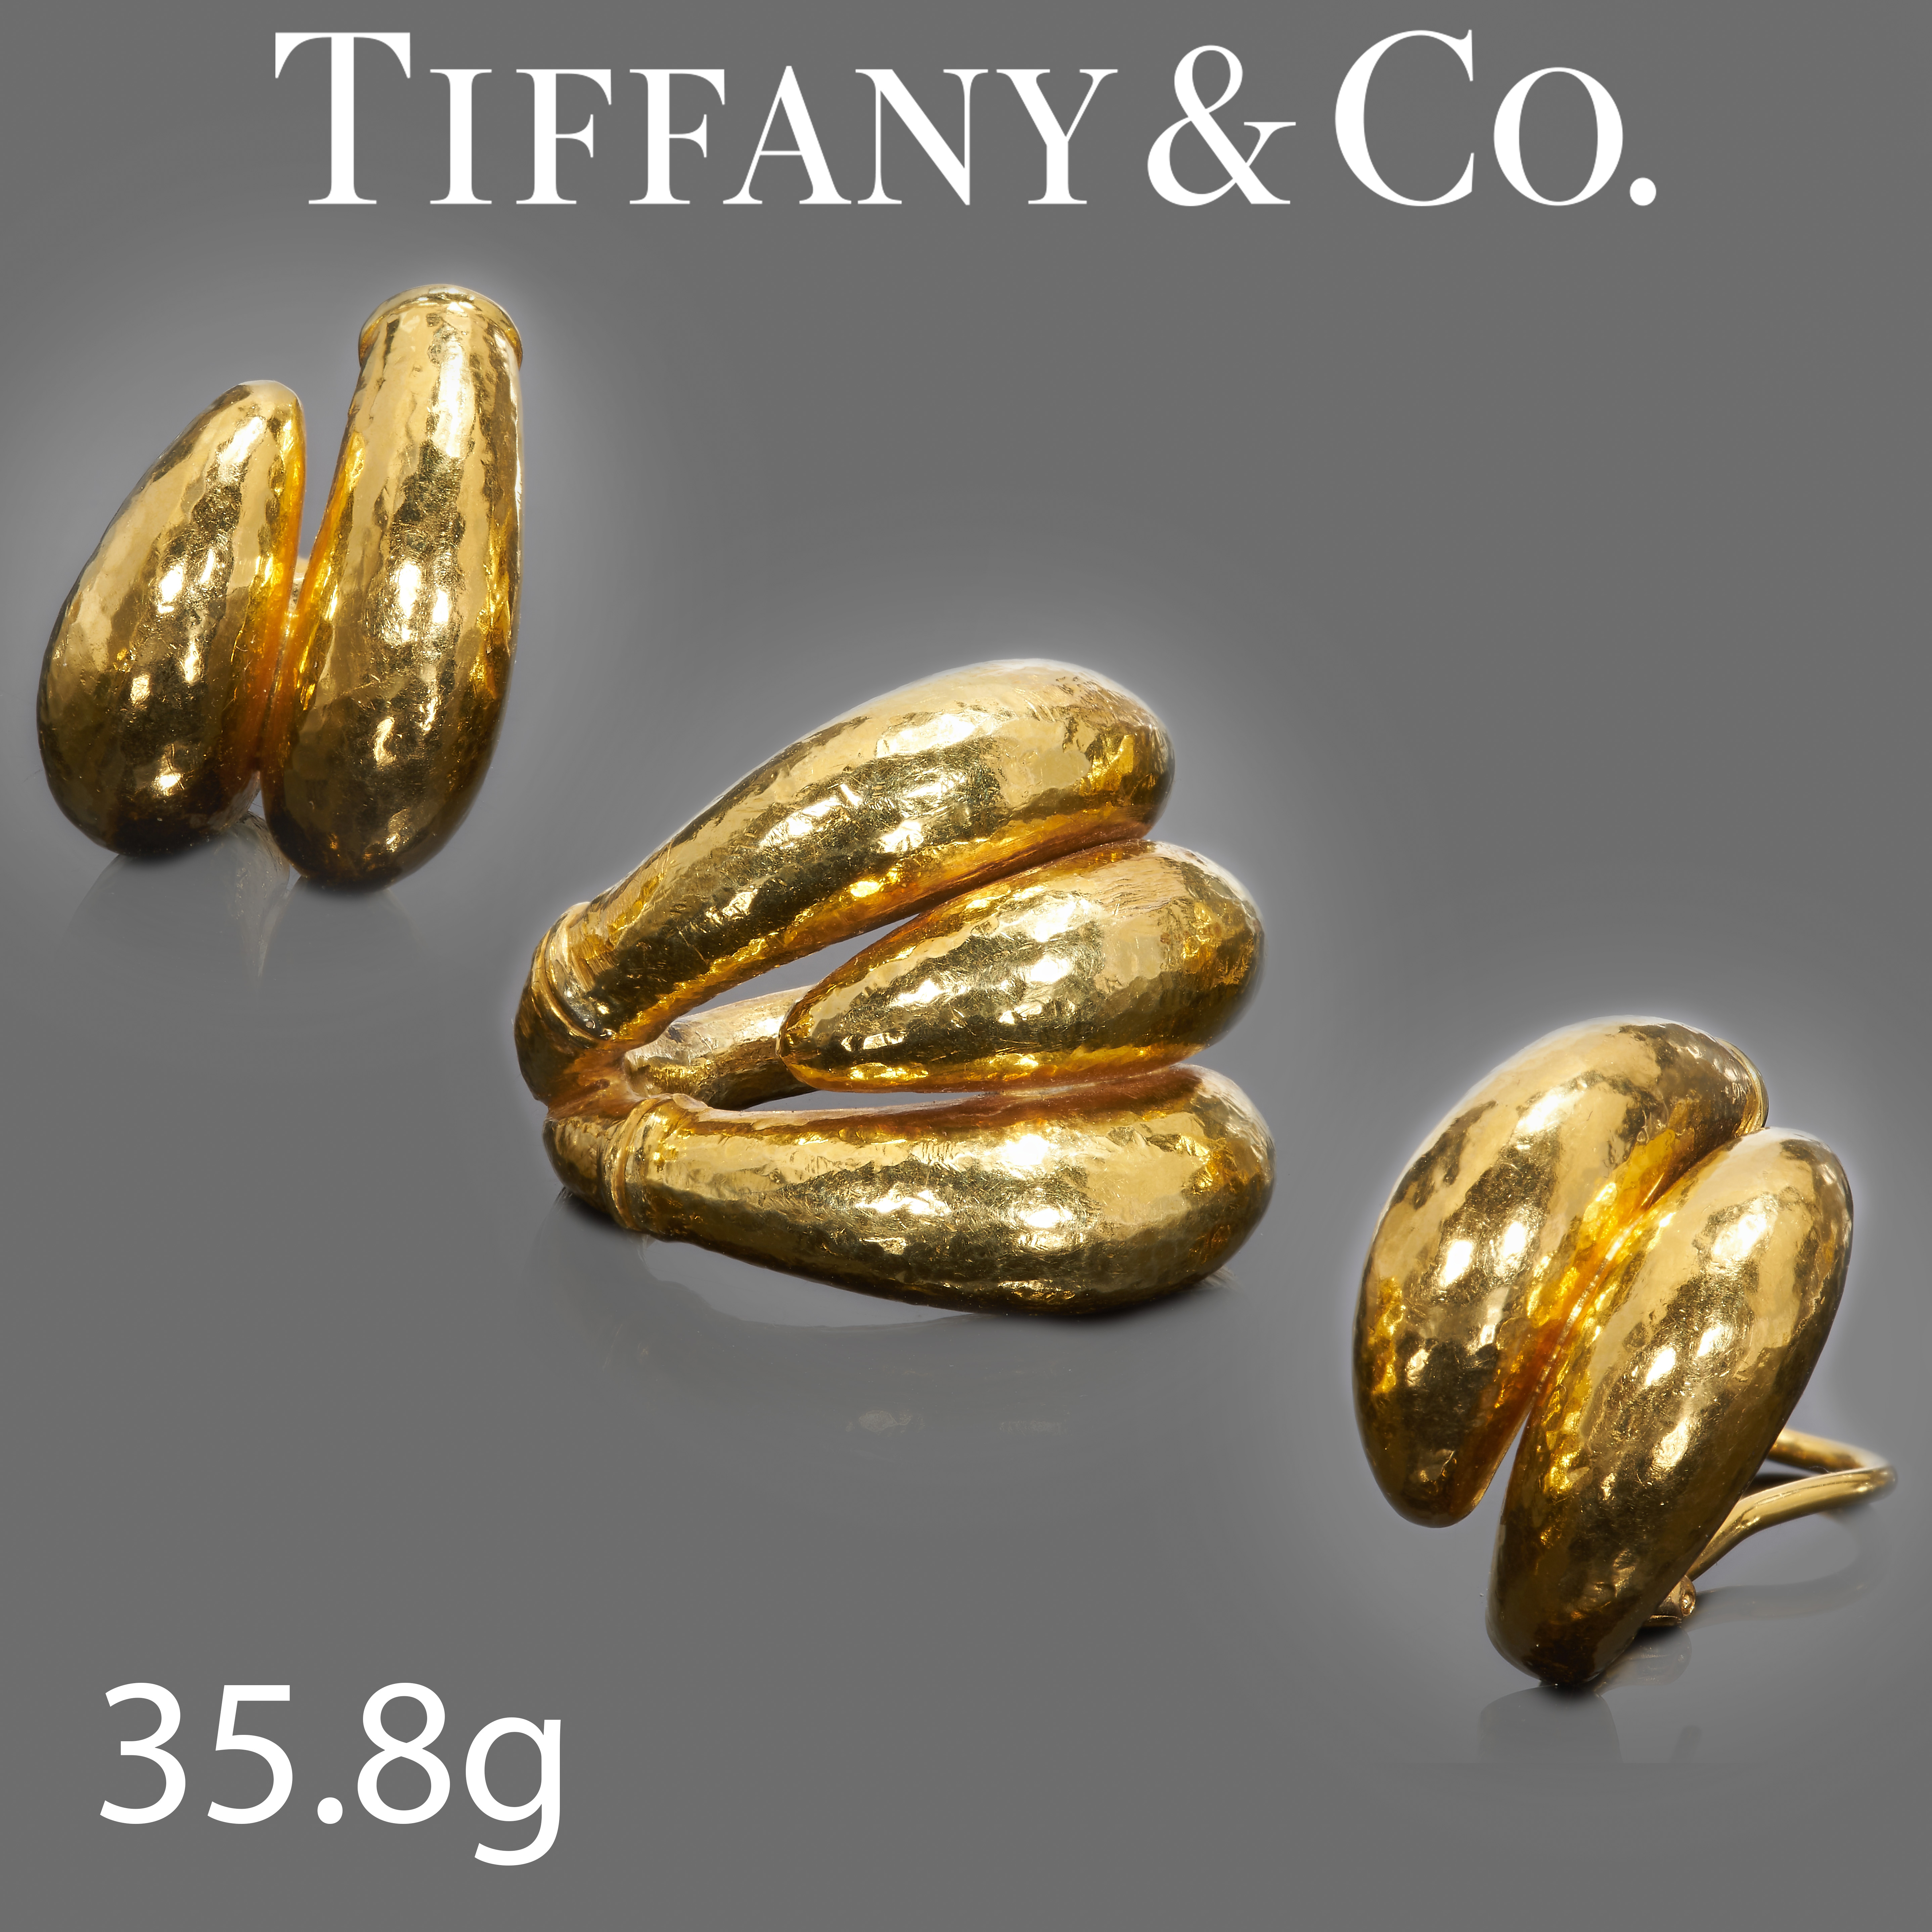 TIFFANY & CO, GOLD RING AND A PAIR OF EARRINGS